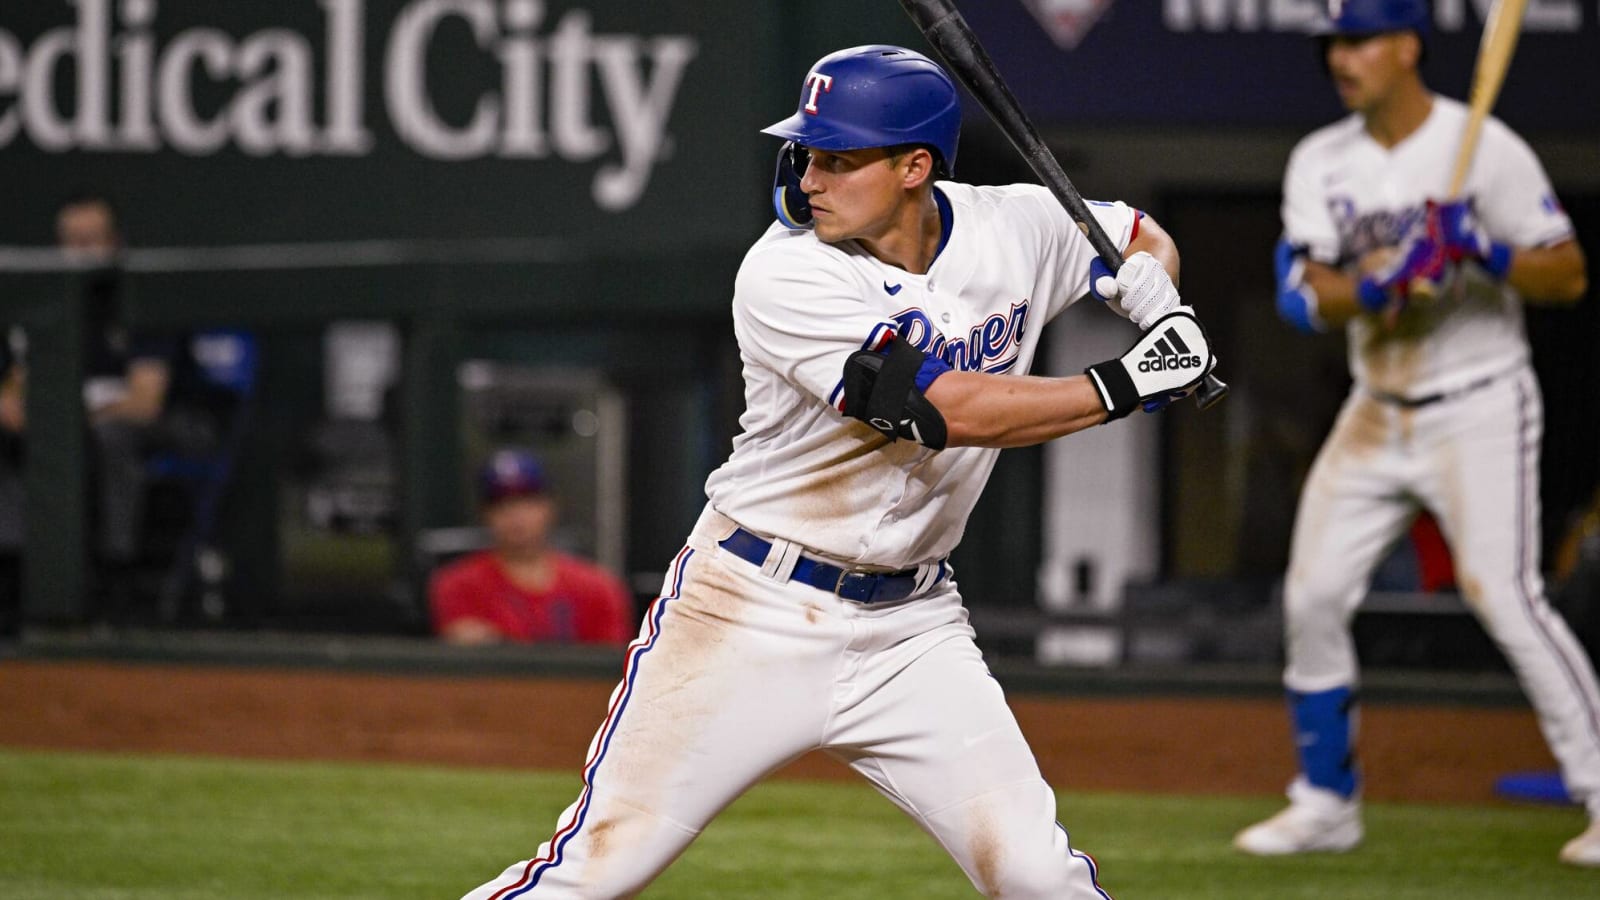 Rangers set to send Corey Seager on rehab assignment